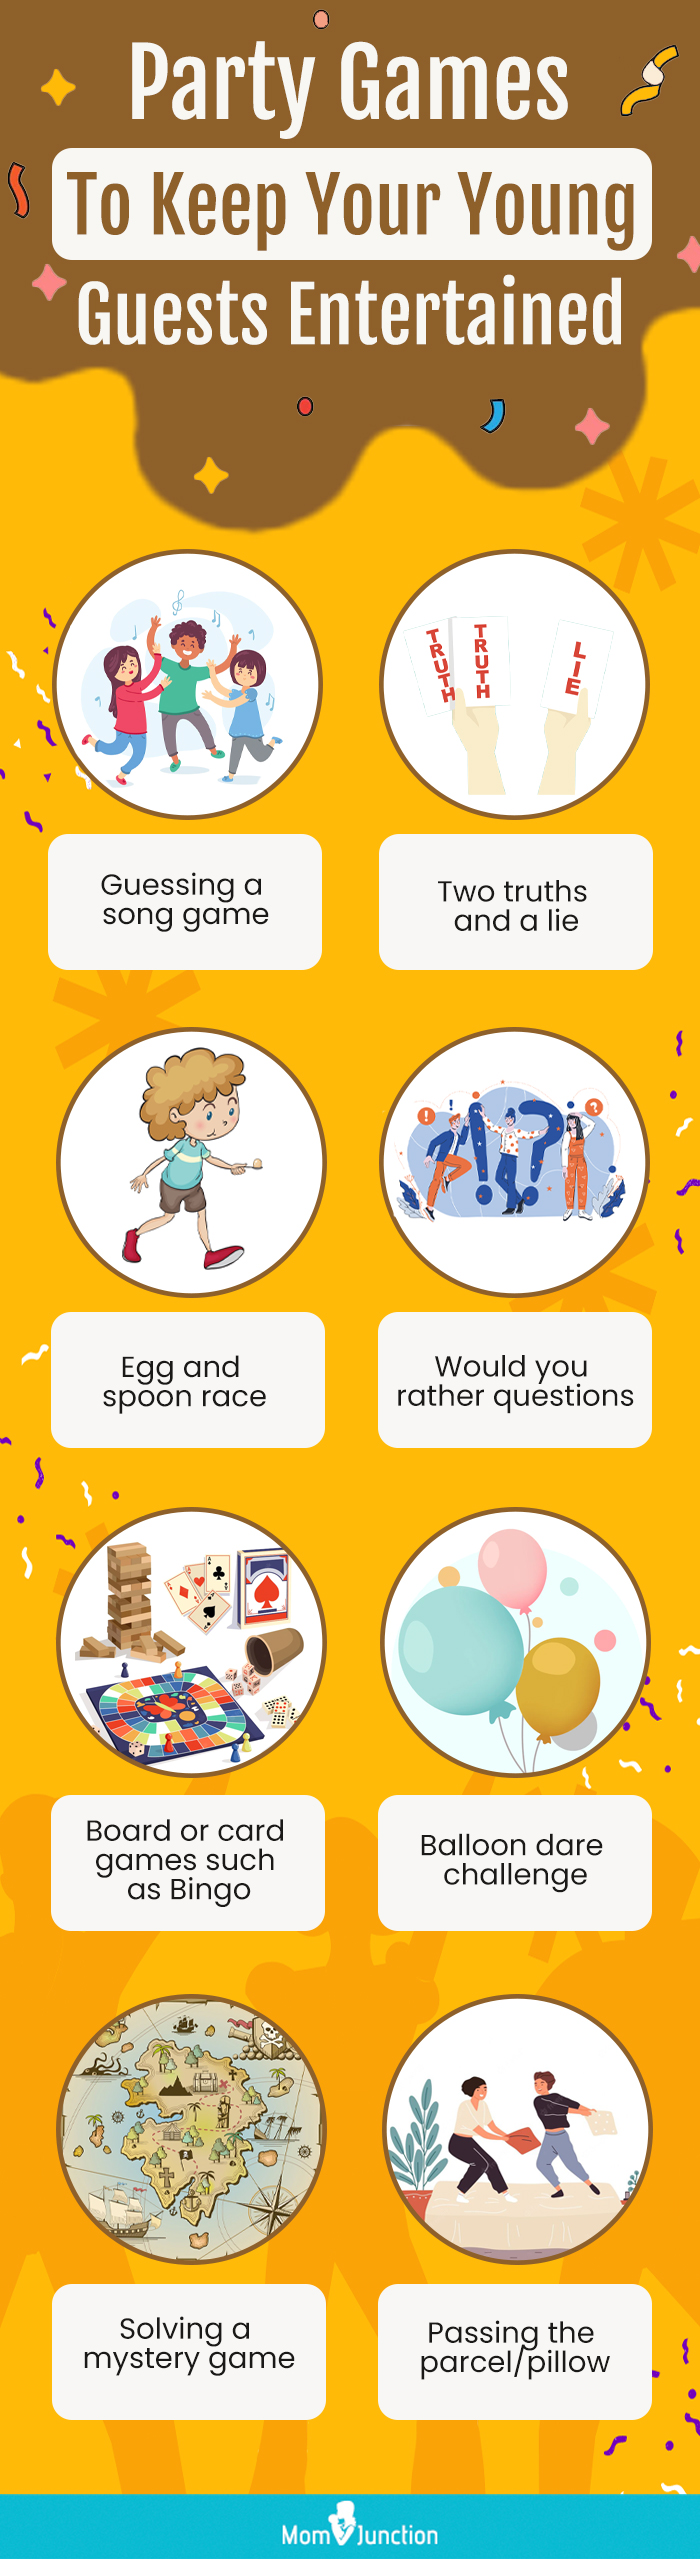 party games to keep your young guests entertained [infographic]